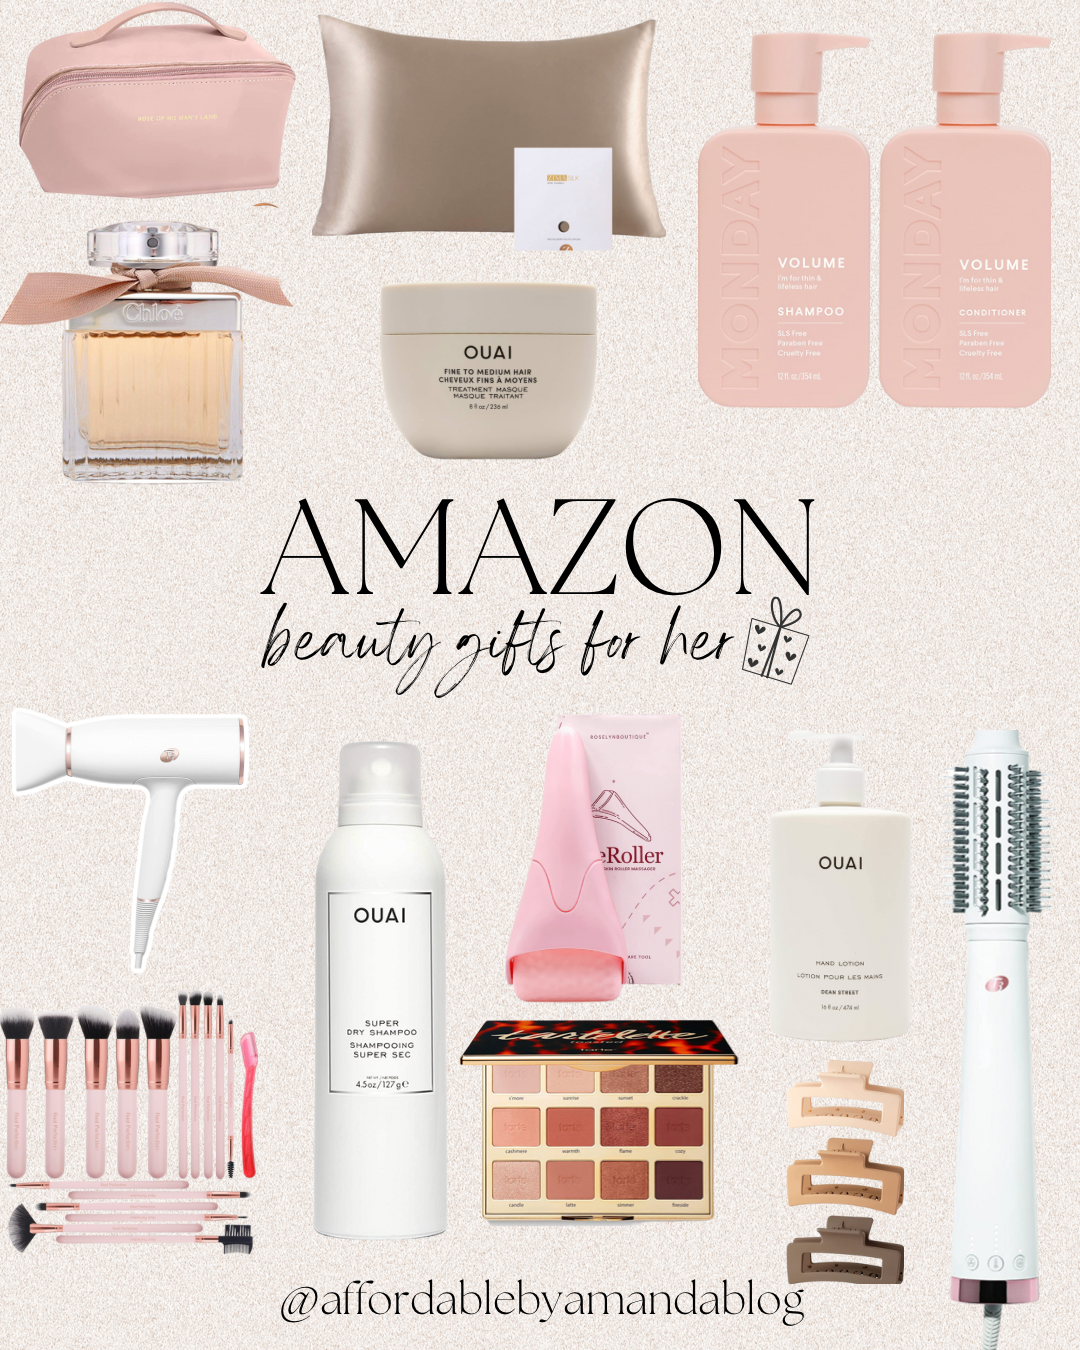 https://affordablebyamanda.com/wp-content/uploads/2022/10/amazon-beauty-gifts-for-her-2022.png